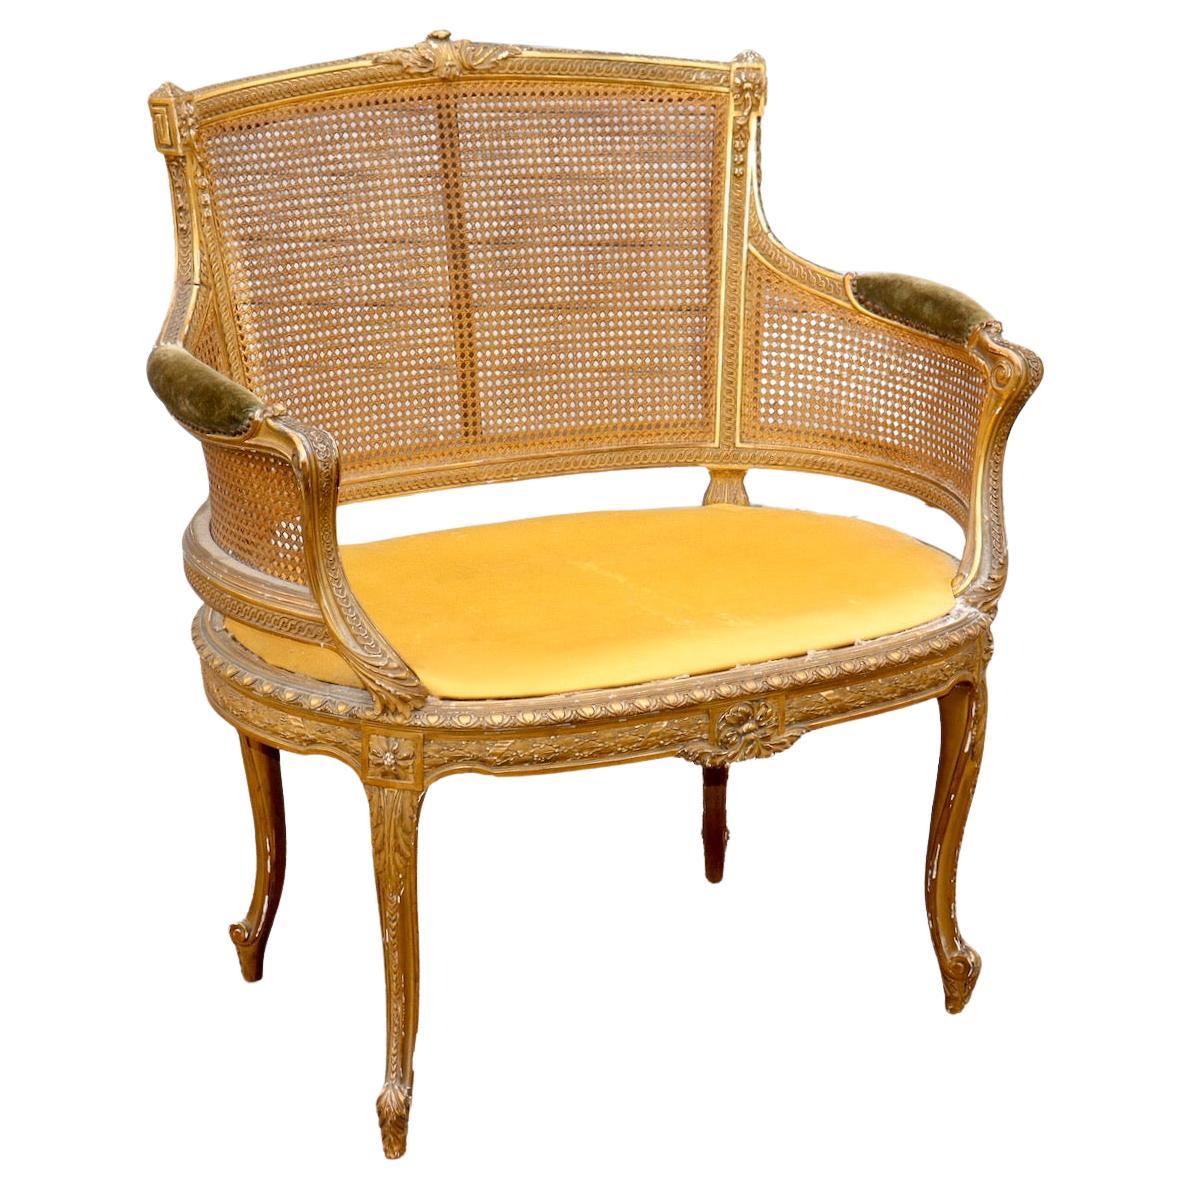 Very Finely Carved and Gilded Wood Napoleon III Marquise en Corbeille